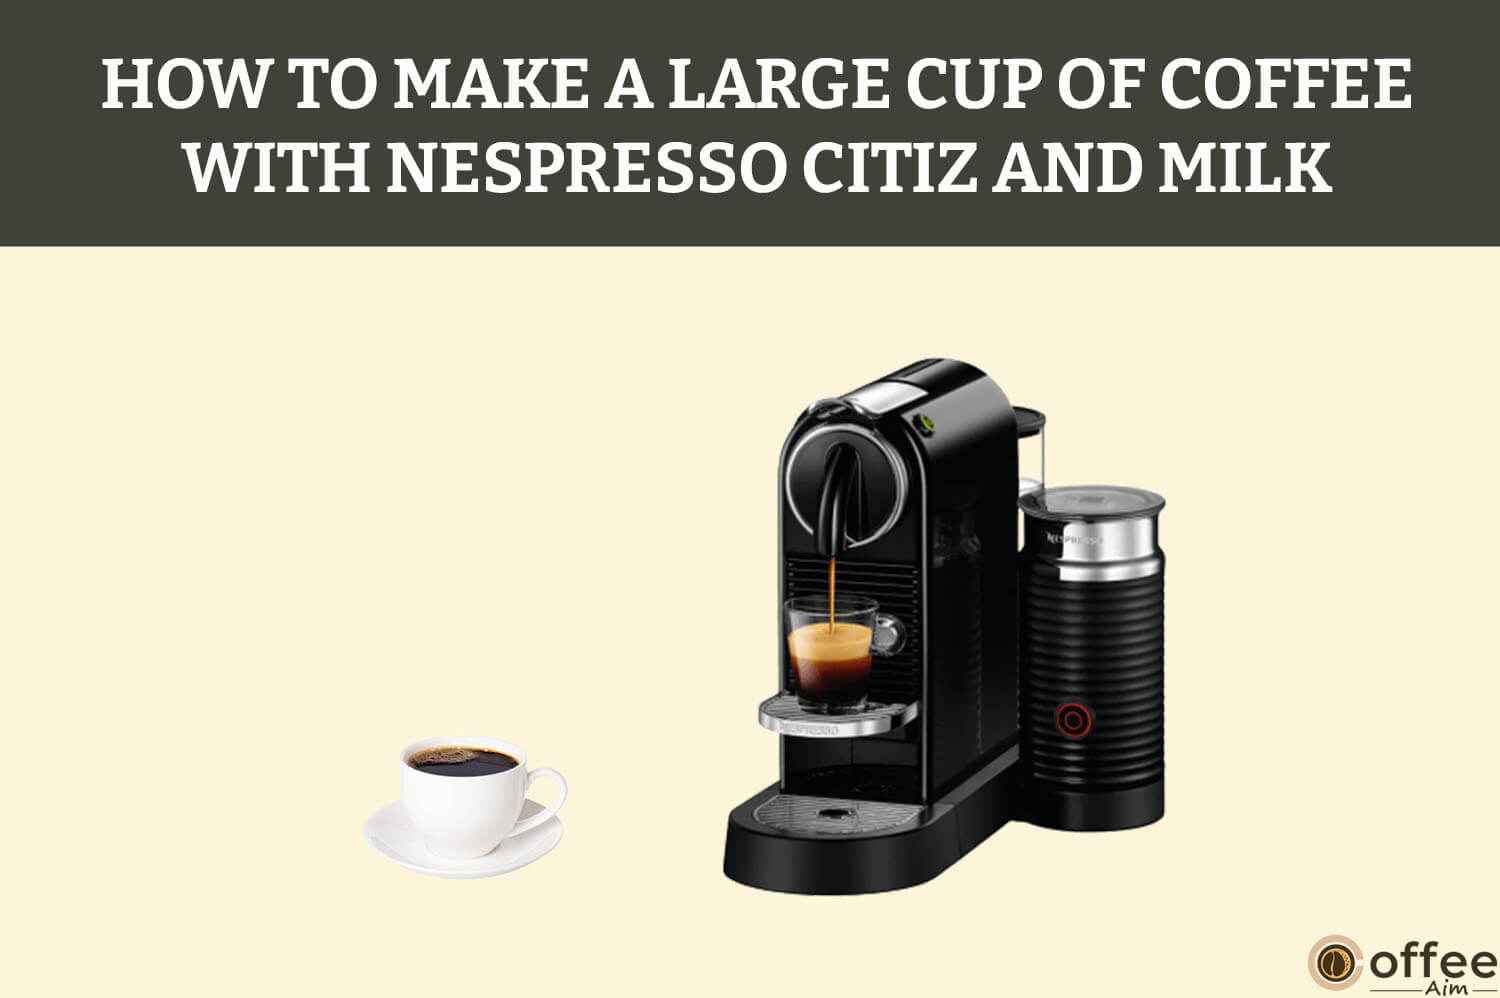 Featured image for the article "How To Make A Large Cup Of Coffee With Nespresso Citiz and Milk"